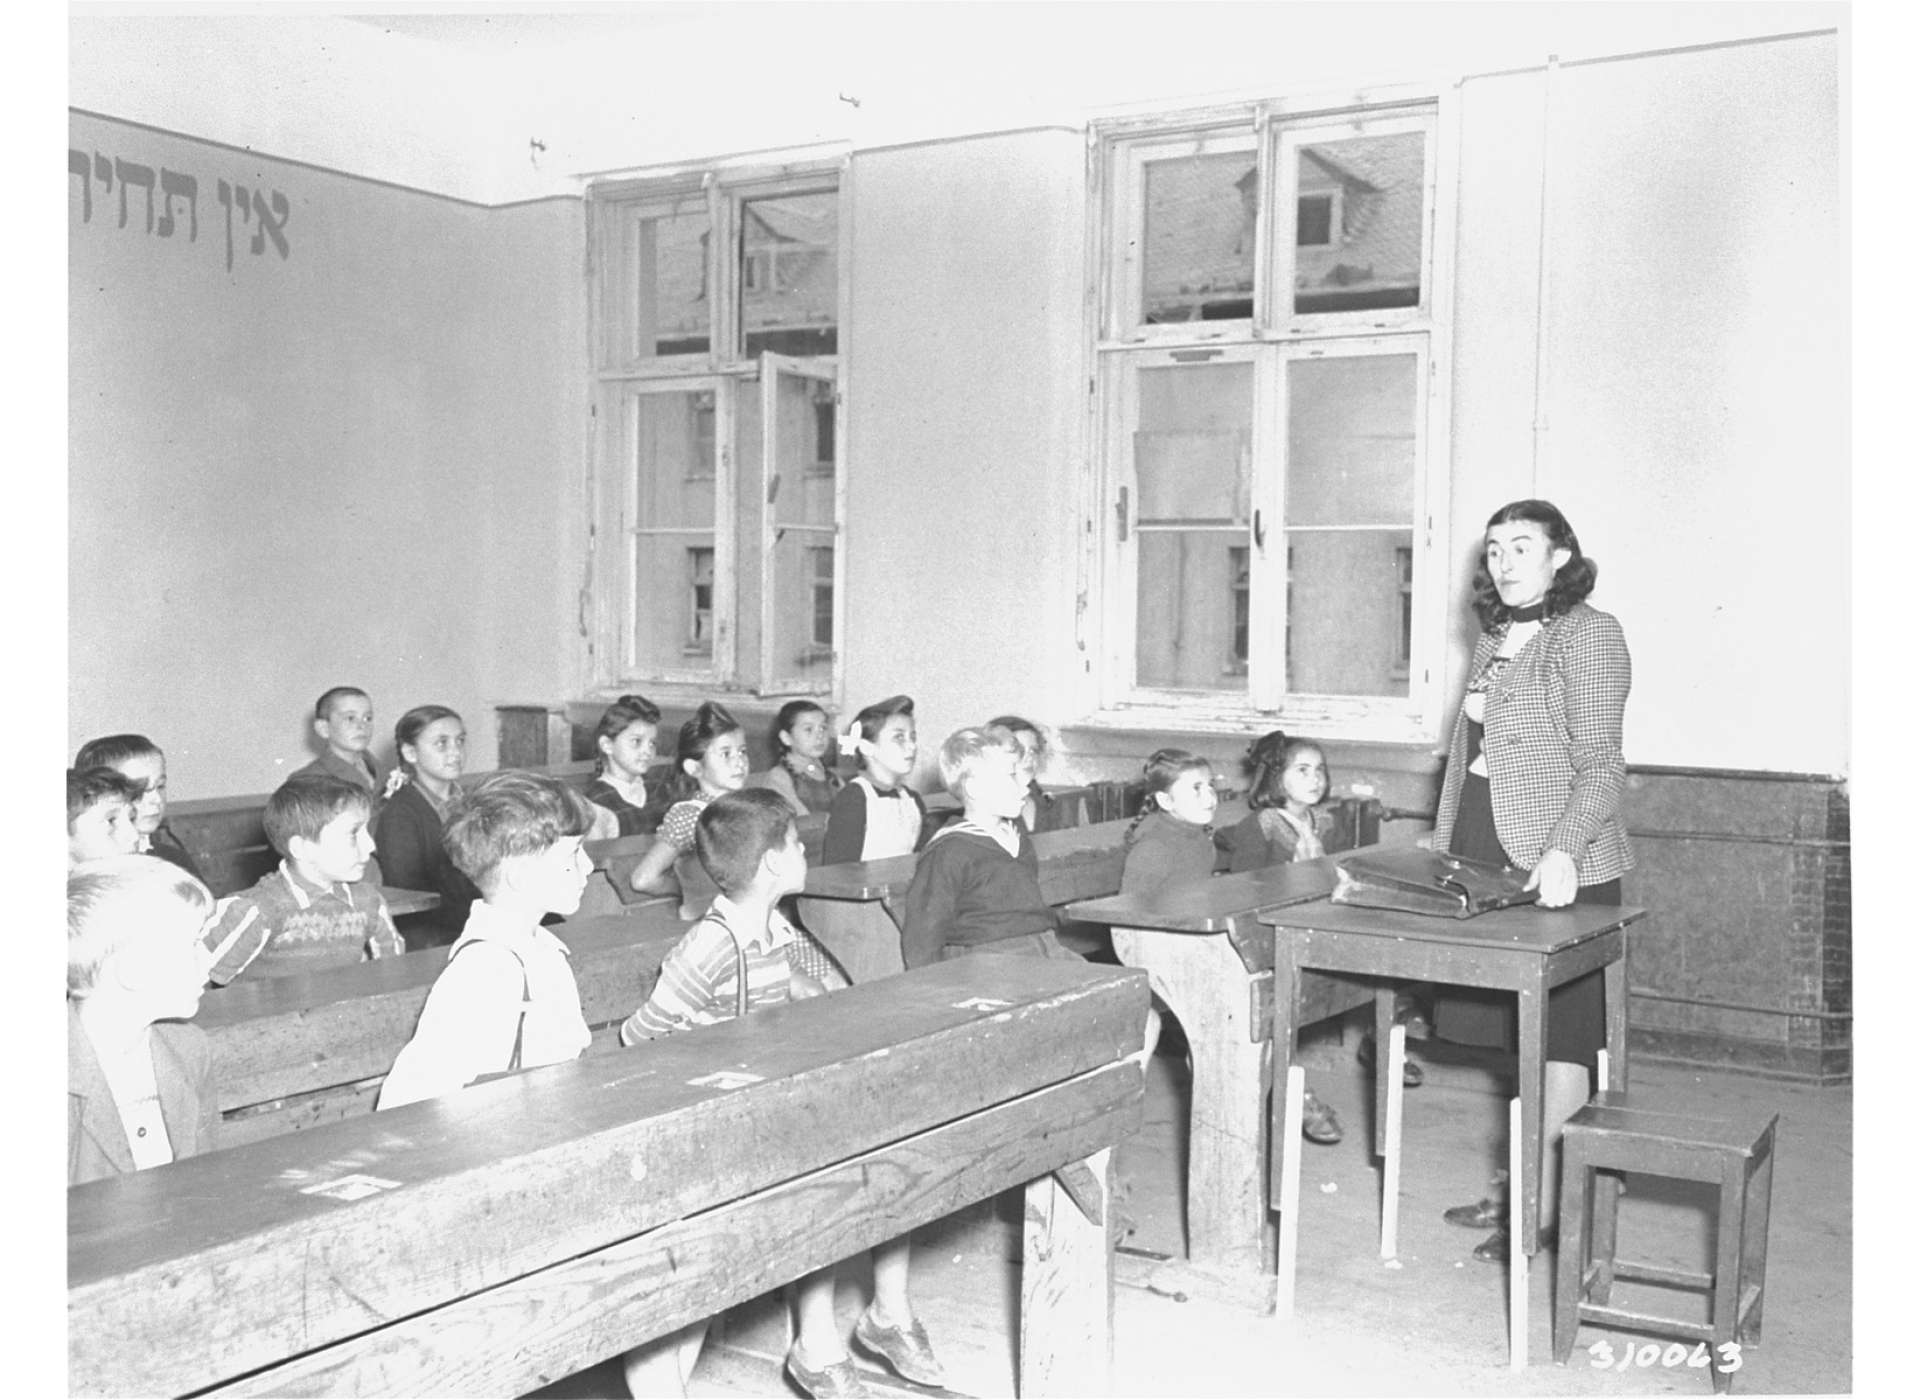 “A classroom at the Jewish displaced persons camp in Wetzlar,” Hugh Palmer, September 9, 1948, Wetzlar Germany, United States Holocaust Memorial Museum, courtesy of National Archives and Records Administration, College Park, Photograph Number: 82918.